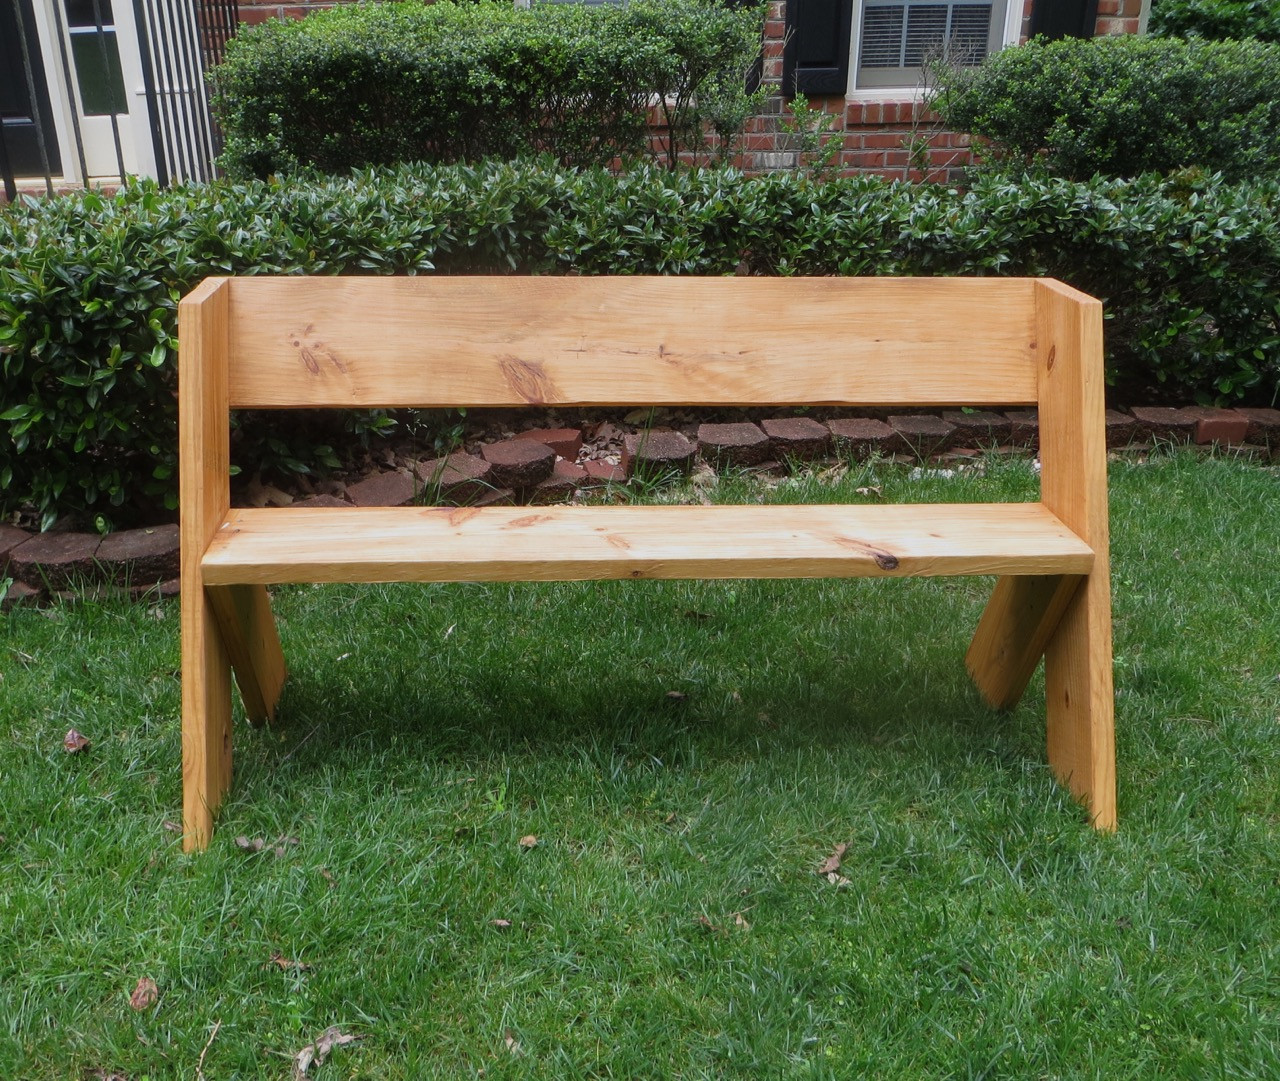 DIY Wood Bench
 The Project Lady DIY Tutorial $16 Simple Outdoor Wood Bench